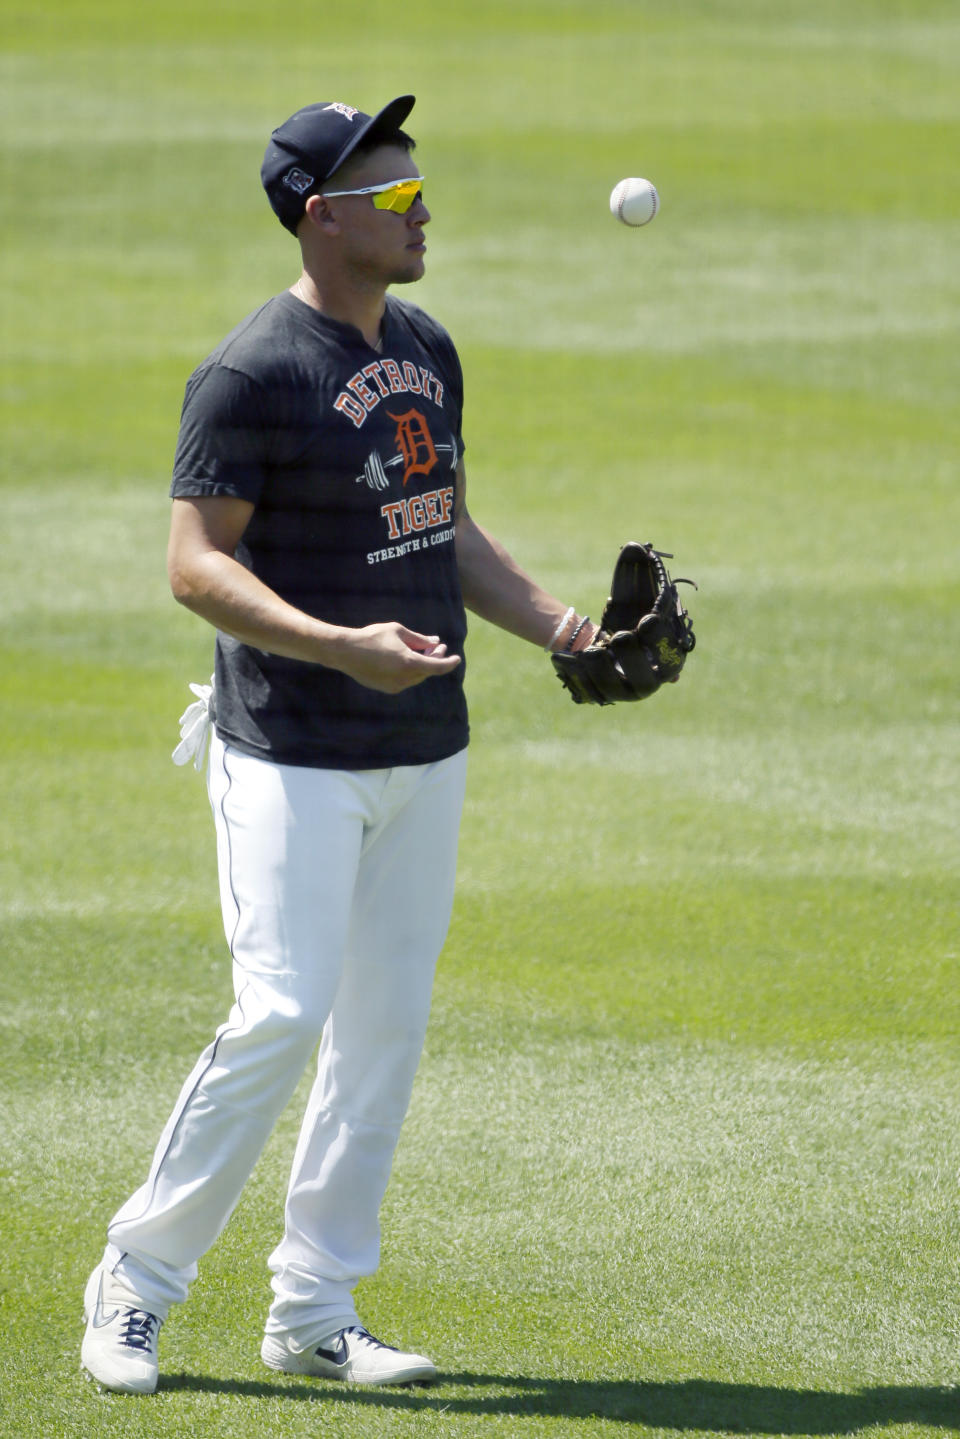 Detroit Tigers' JaCoby Jones flips a baseball during baseball training camp at Comerica Park, Friday, July 3, 2020, in Detroit. (AP Photo/Duane Burleson)